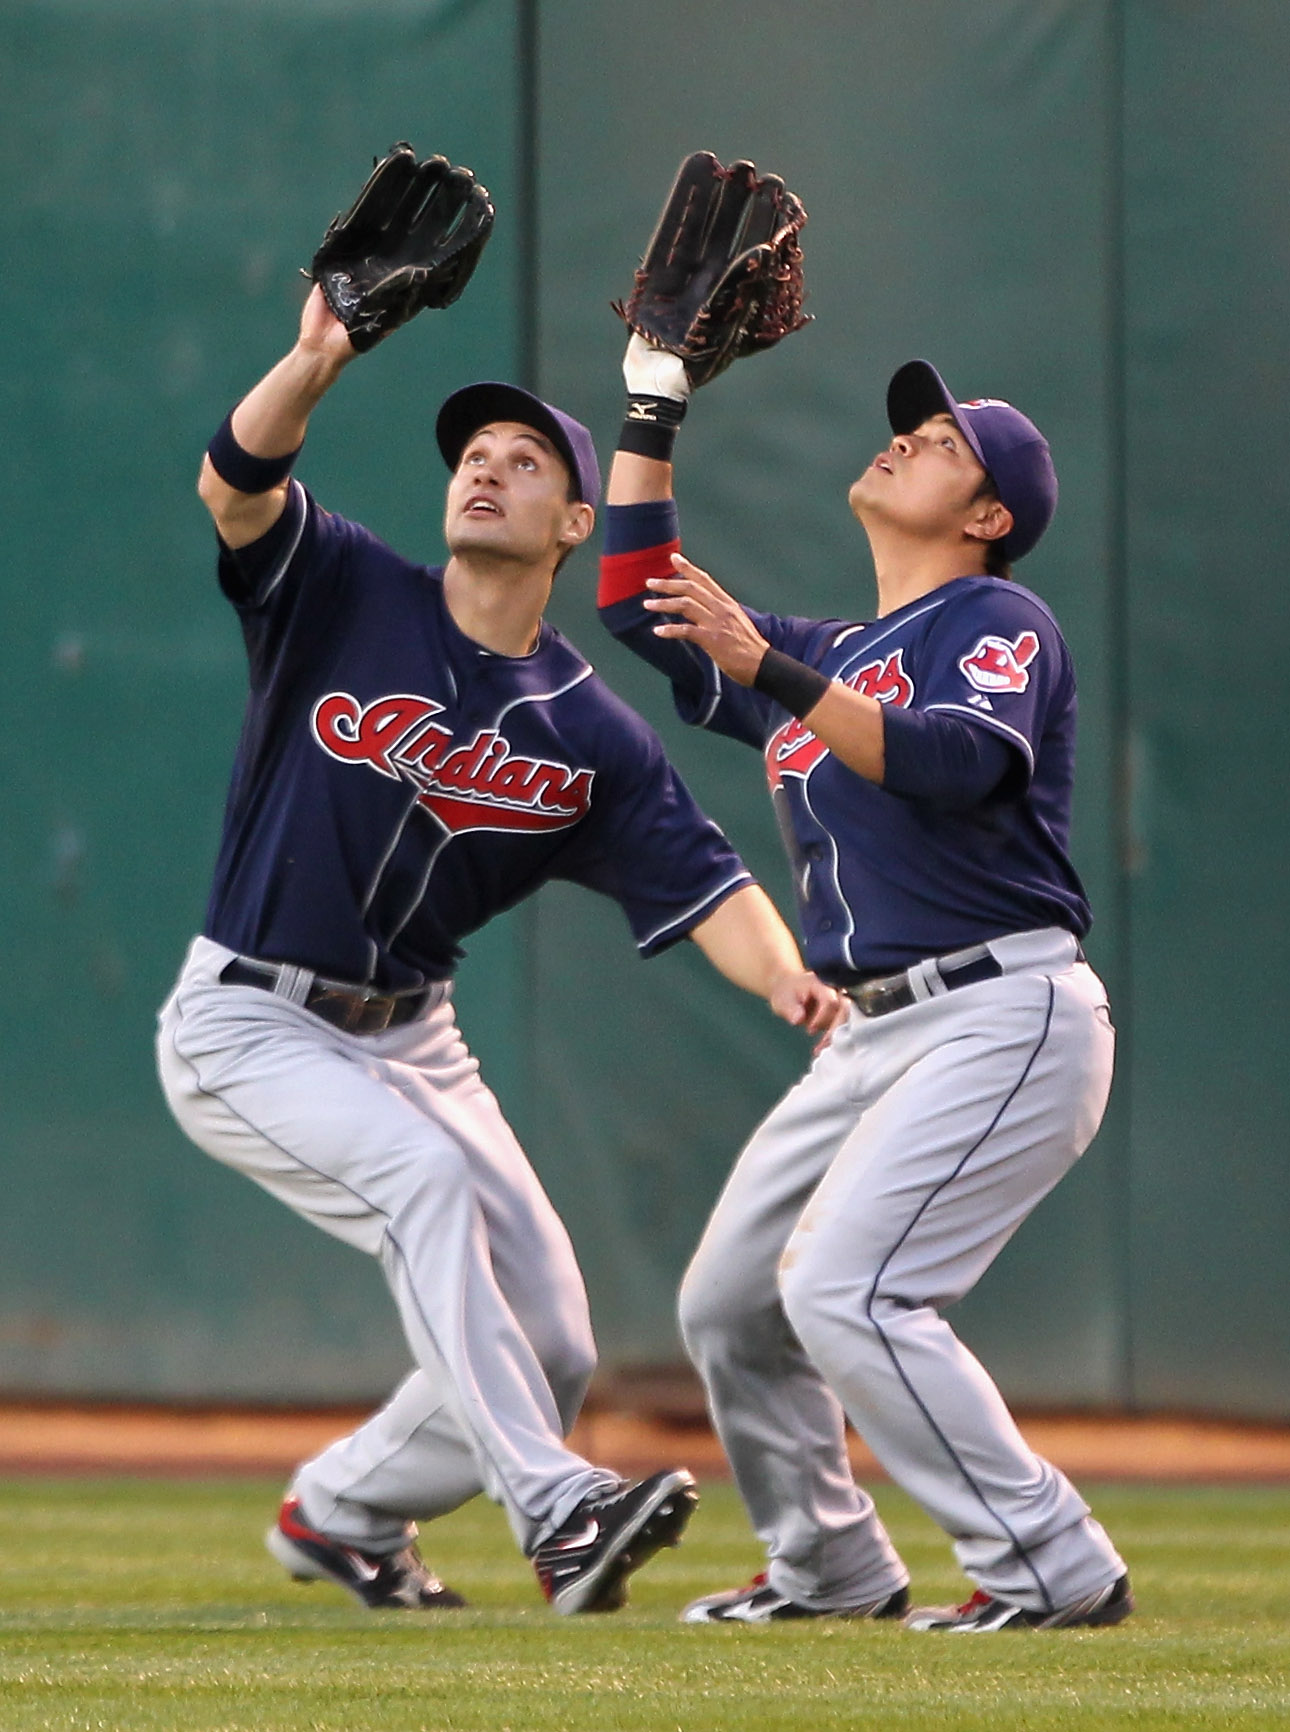 This kind of teamwork has the Indians playing as well as any team in the league.